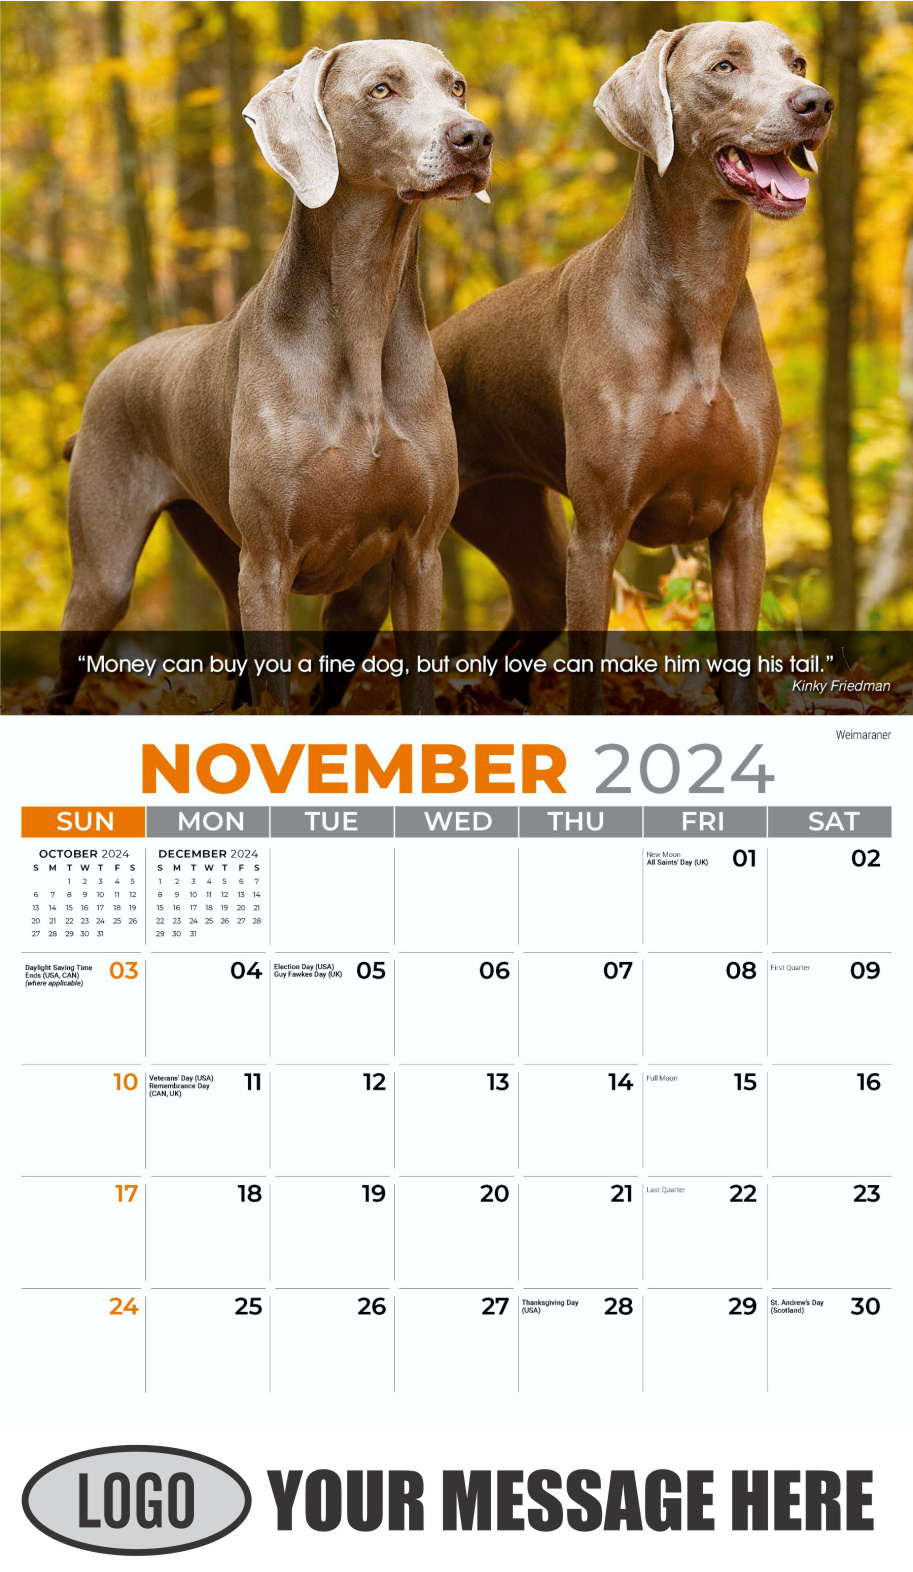 Dogs 2024 Vets and Pets Business Promotion Calendar - November